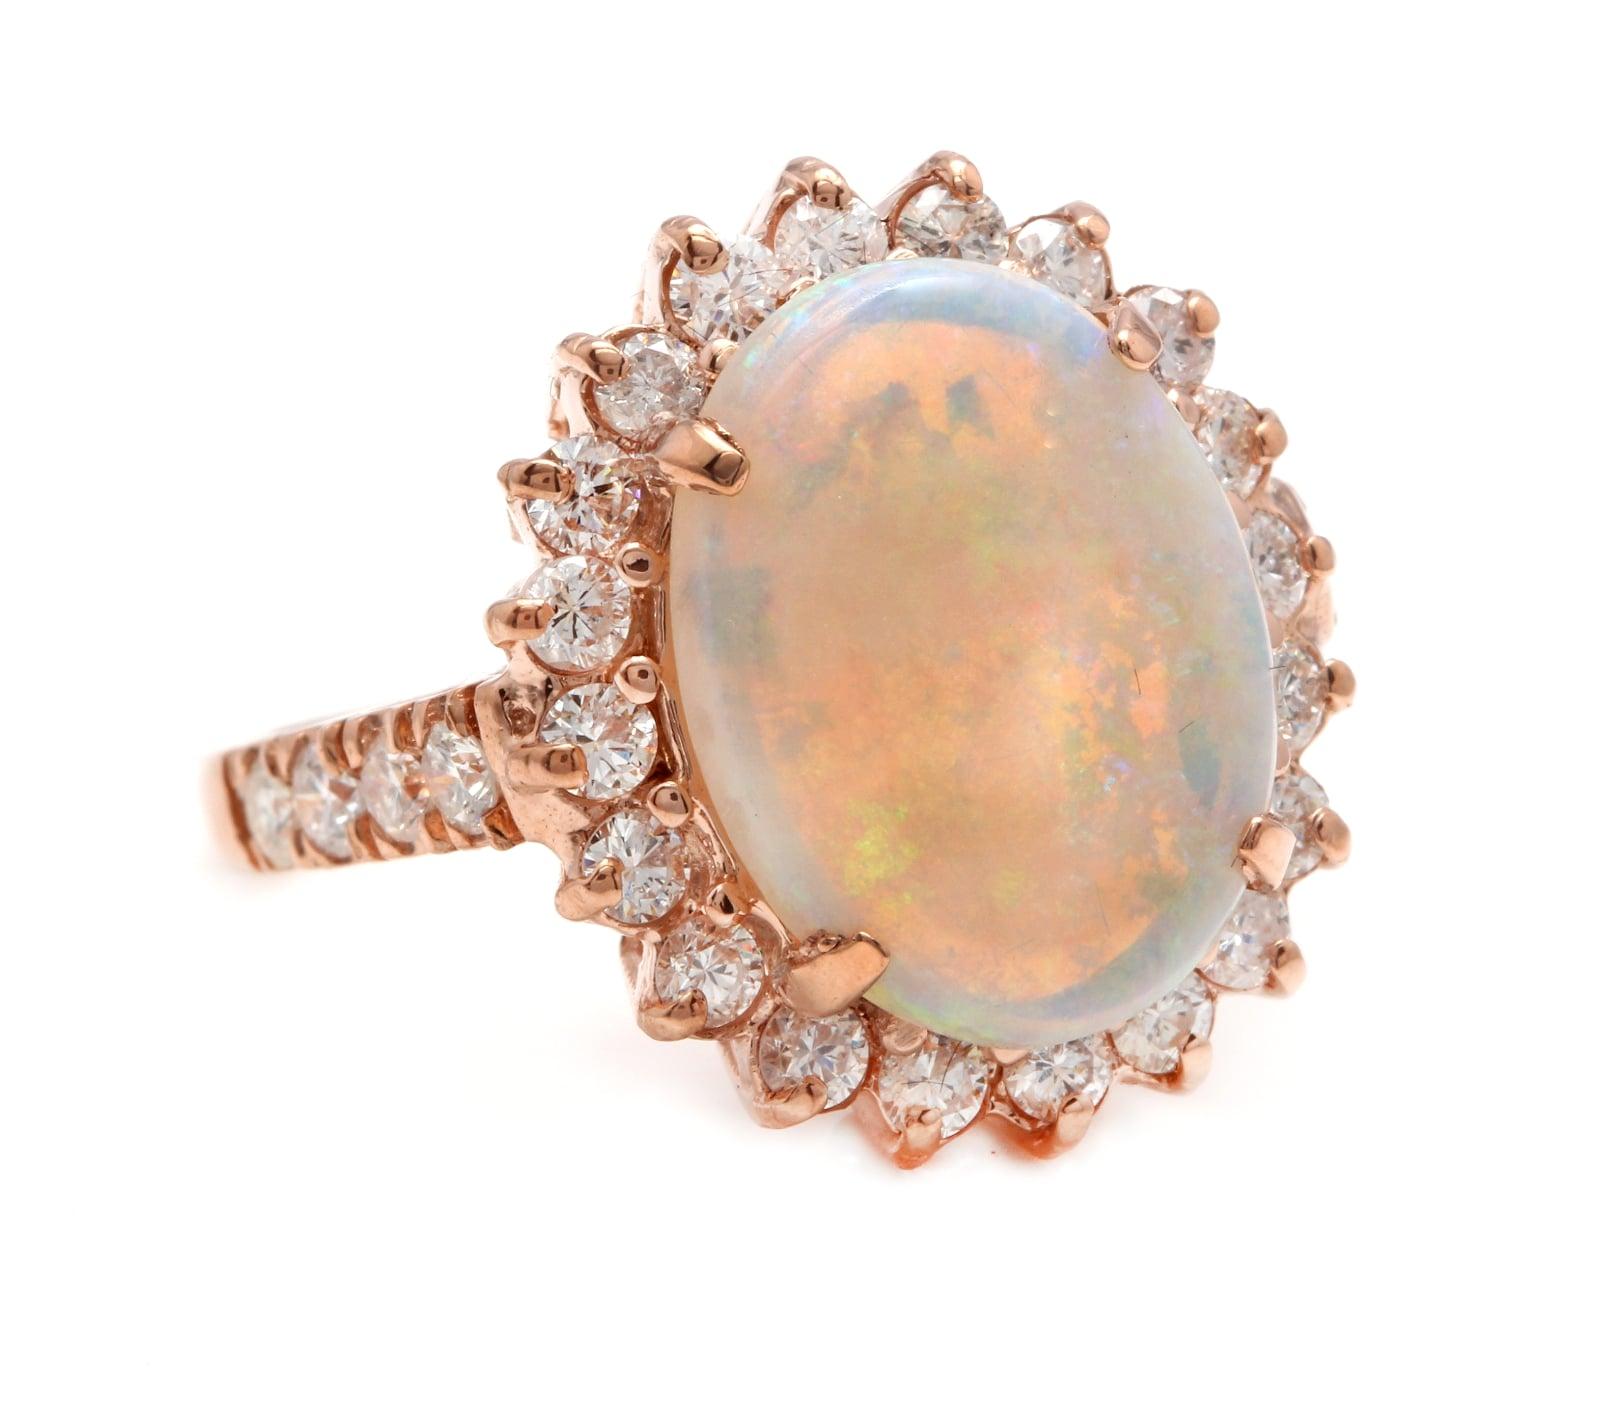 7.10 Carats Natural Impressive Australian Opal and Diamond 14K Solid Rose Gold Ring

Amazing play of colors opal. Pictures don't show the beauty of the opal.

Total Natural Opal Weight is: Approx. 6.00 Carats

Opal Measures: Approx. 14.00 x